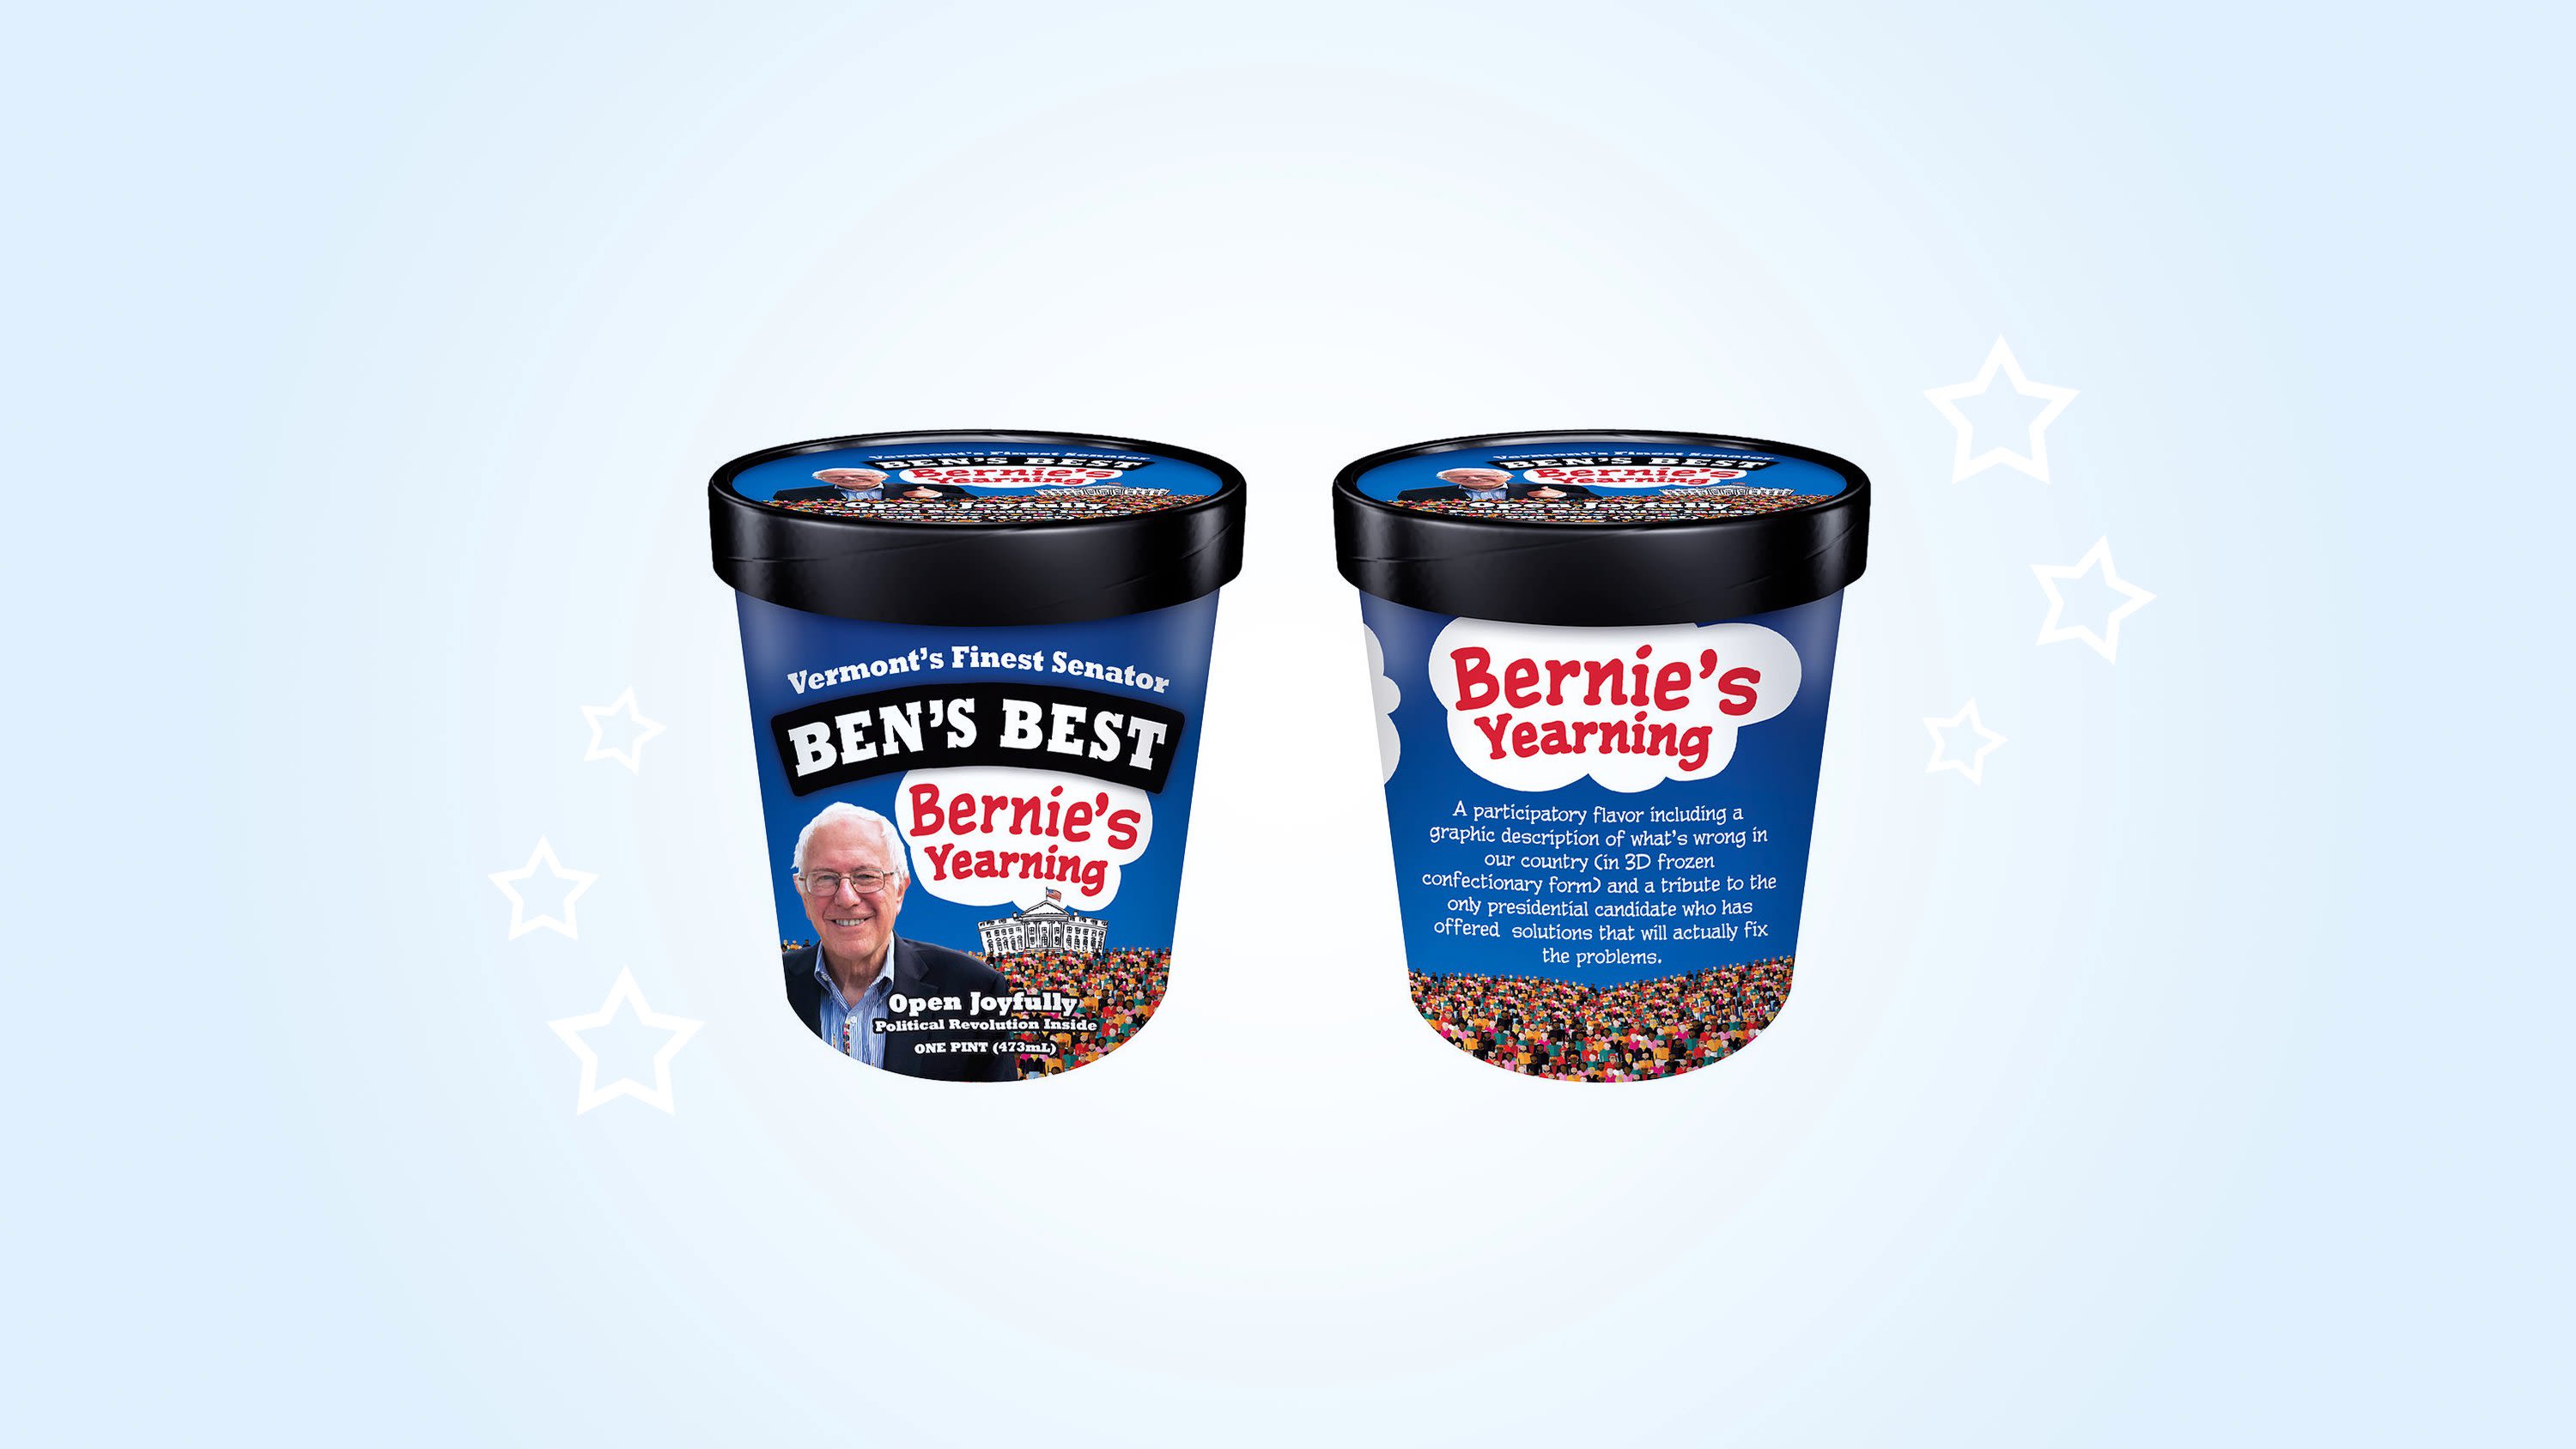 The Best Ice Cream Makers to End Your Ben and Jerry's Habit - WSJ